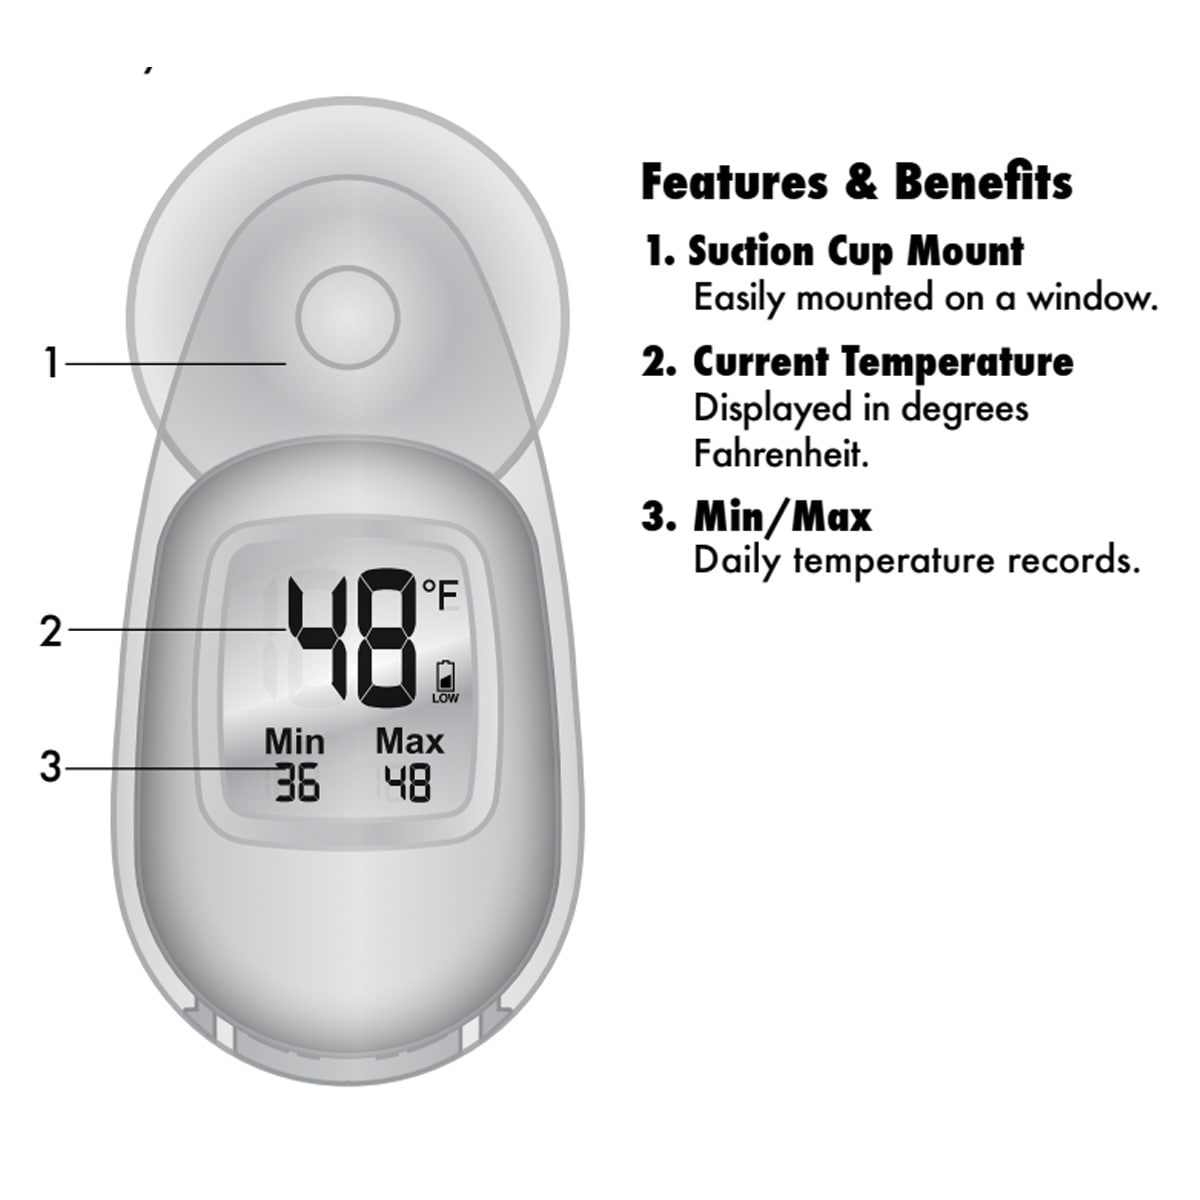 AcuRite Acurite Suction Cup Thermometer 